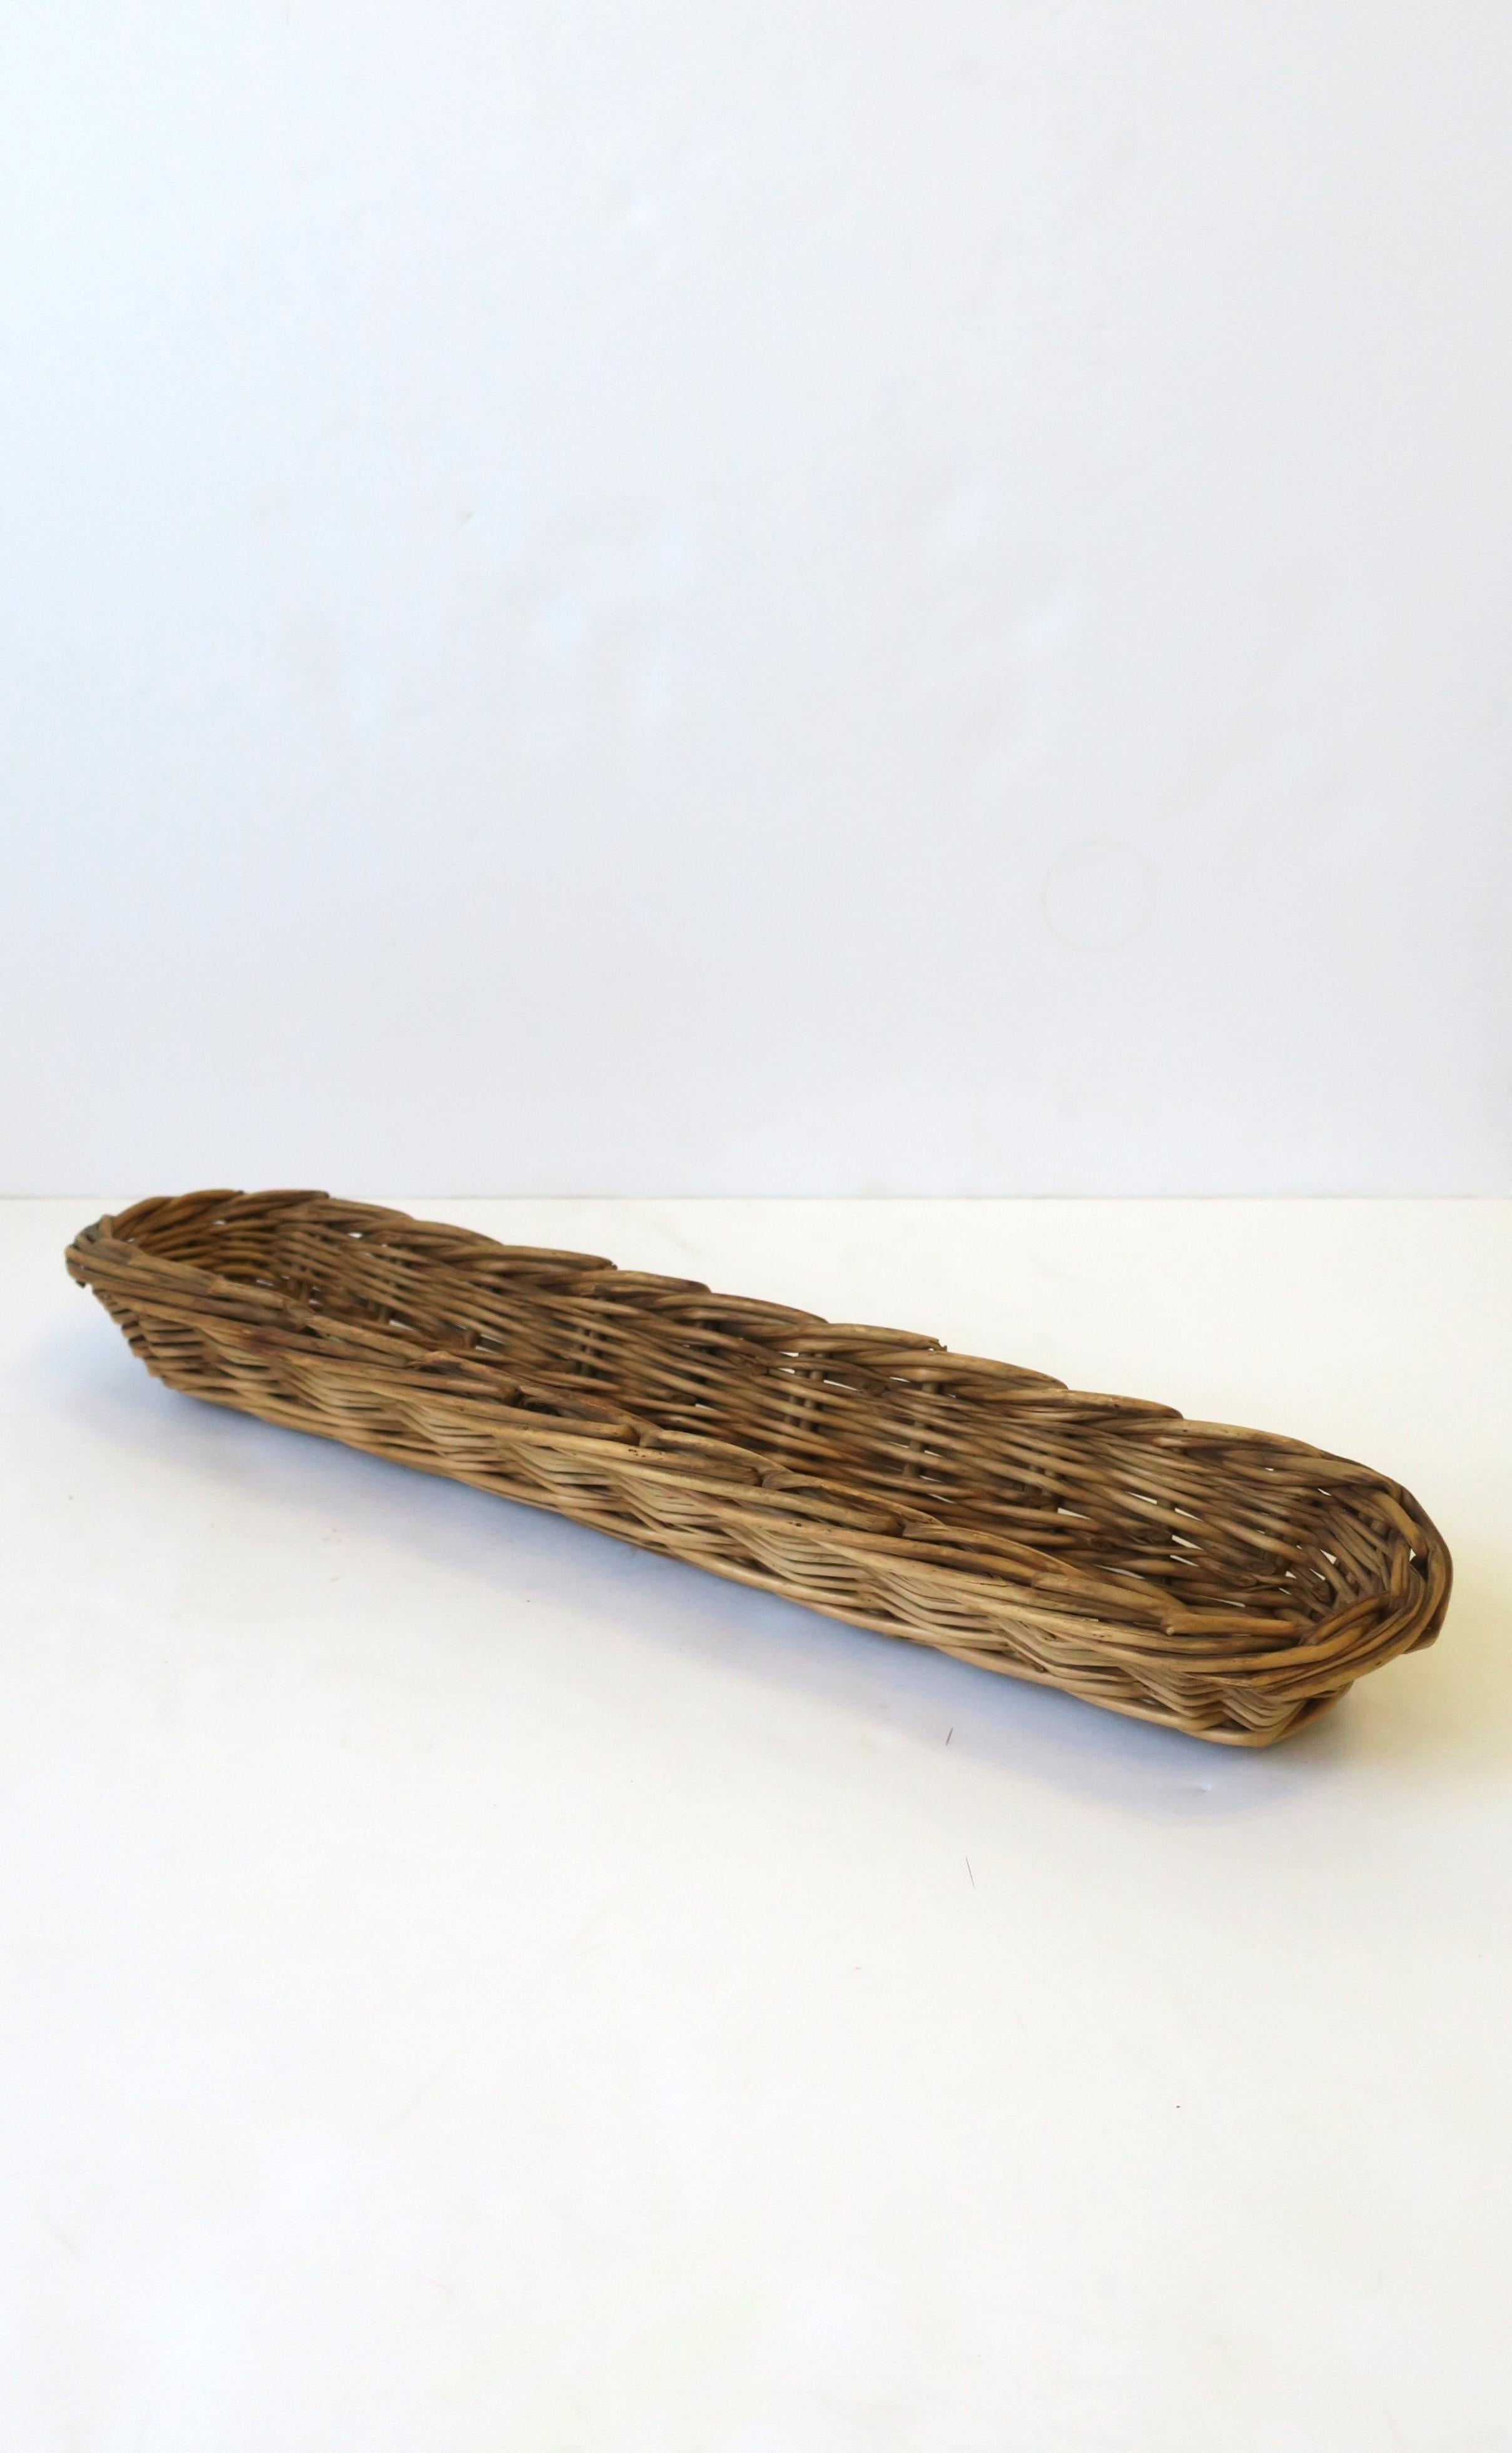 A vintage wicker basket, circa mid-20th century, USA. A great decorative basket for fruit, vegetables, bread, etc. Piece is oblong. Dimensions: 3